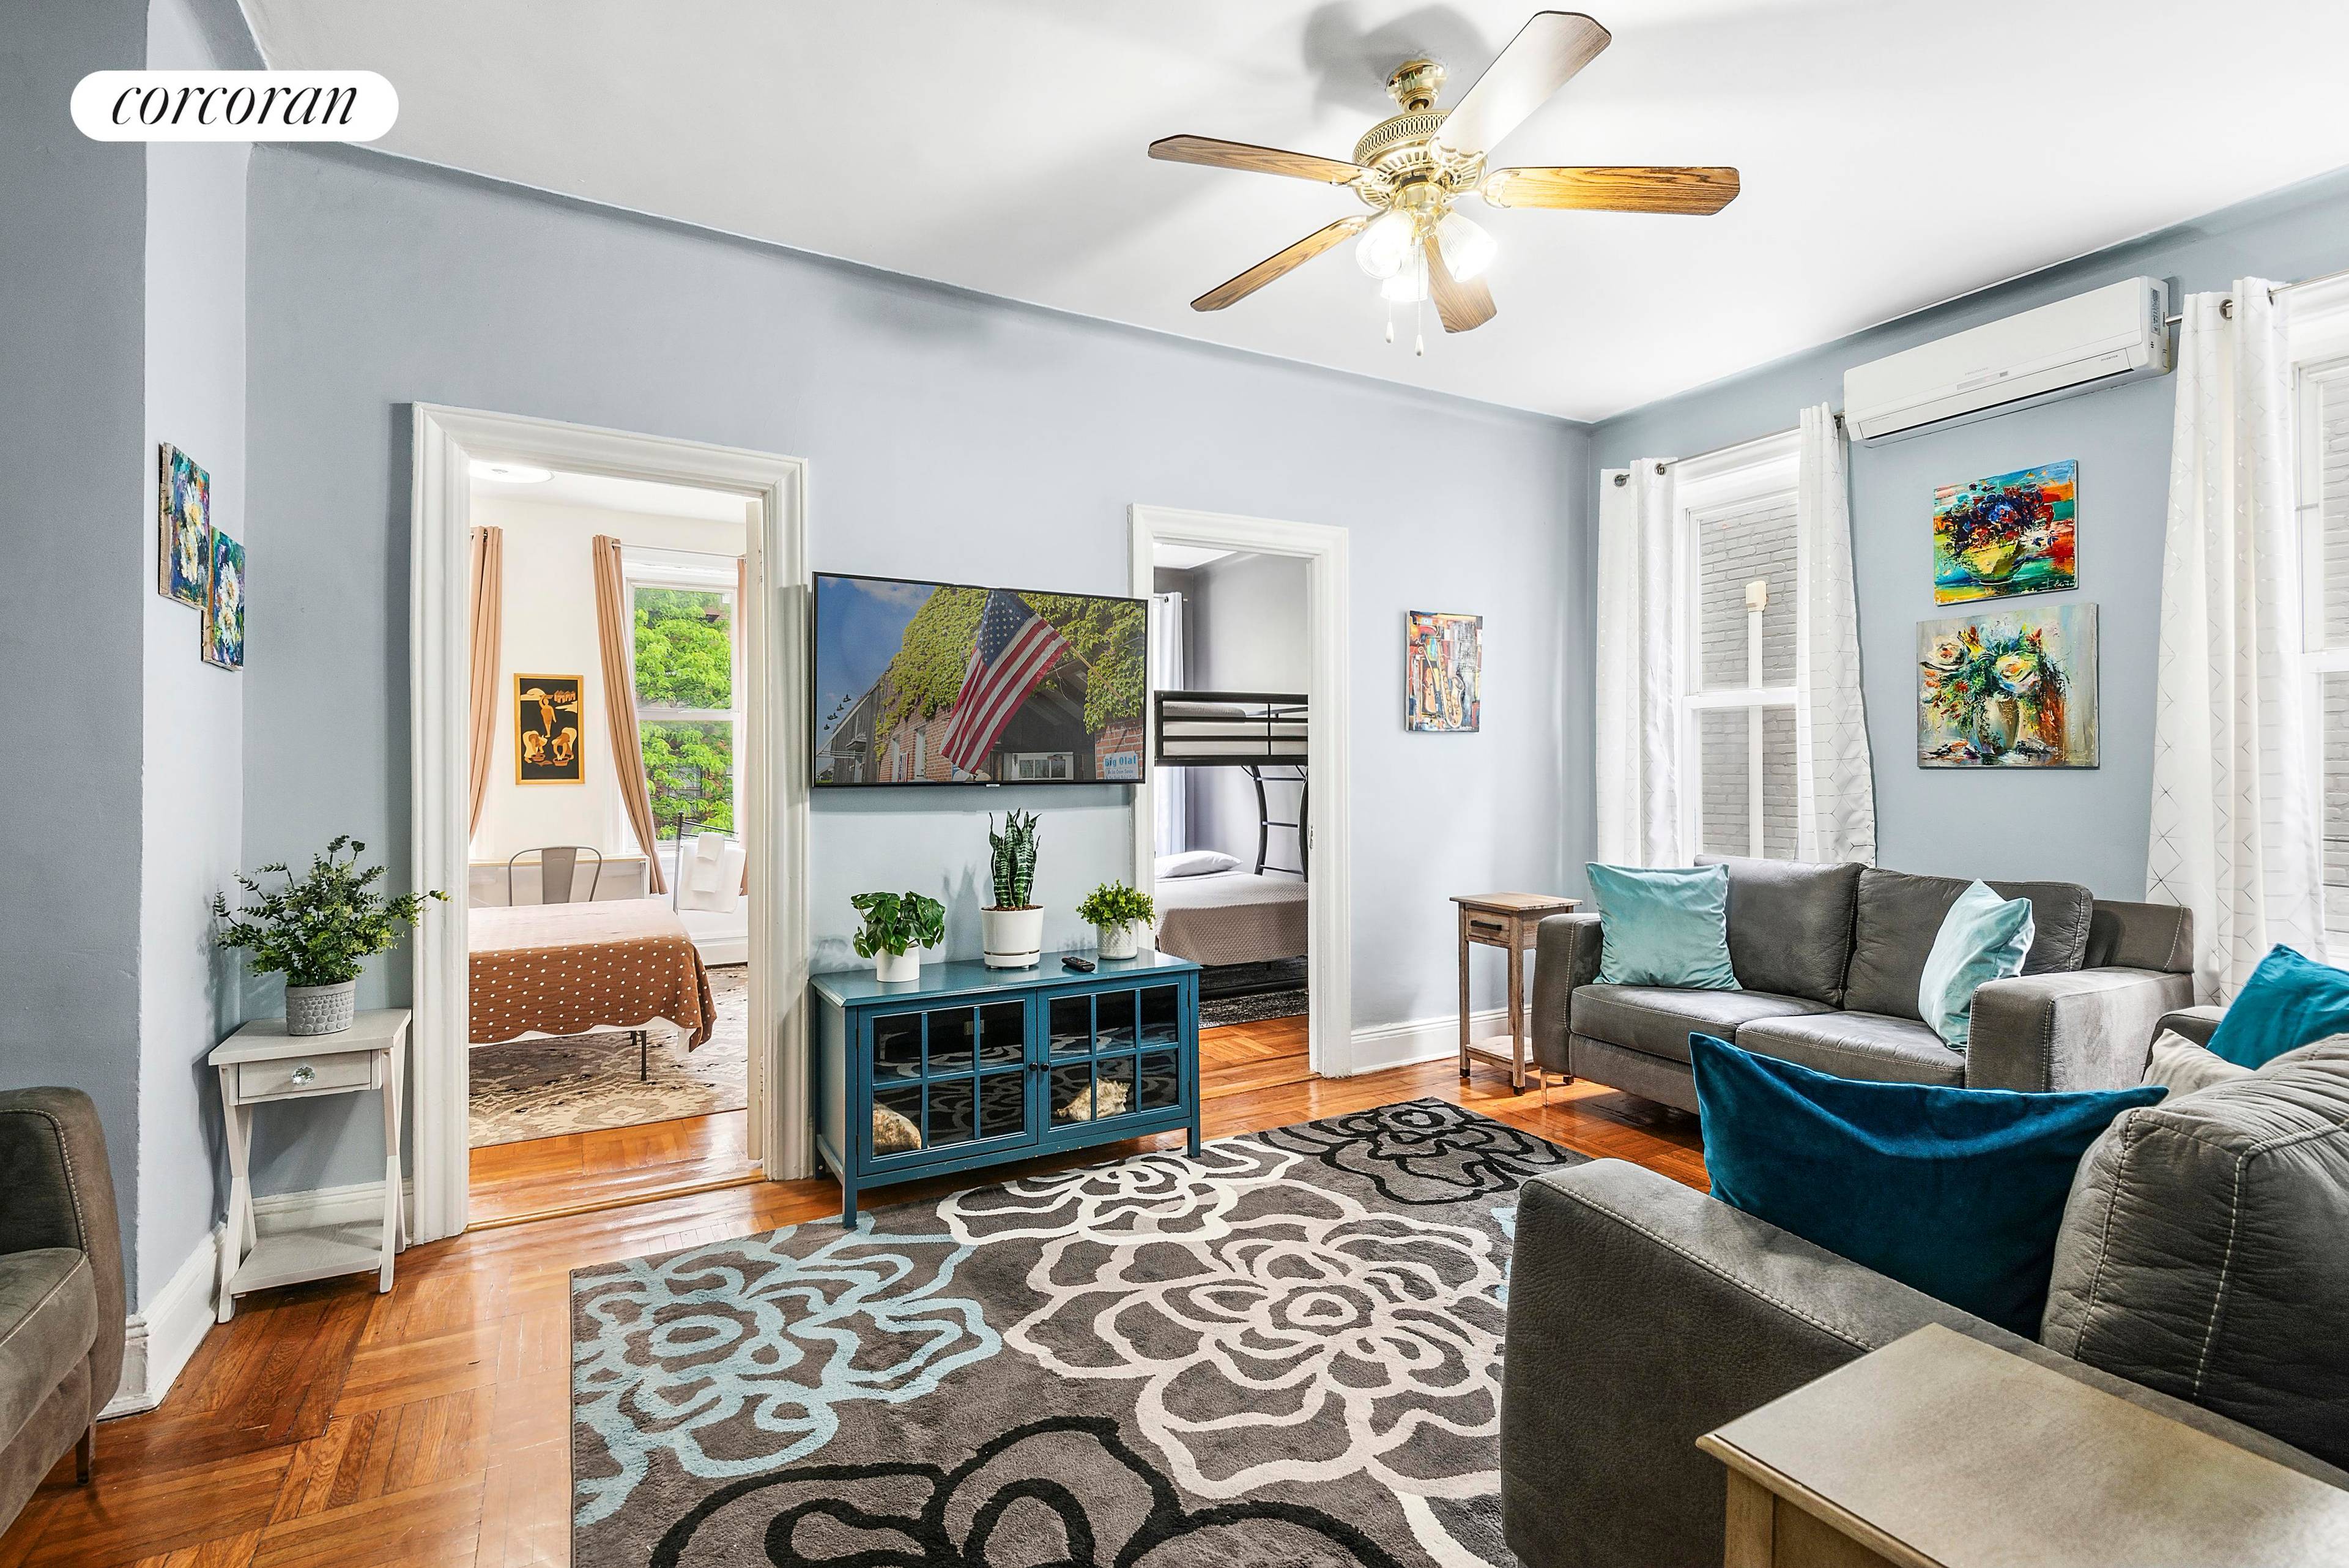 Furnished real 2br with sunny exposures amp ; washer dryerAvailable July 11 for 1 year lease Just one block to the Botanical Gardens amp ; near 2 3 4 5 ...